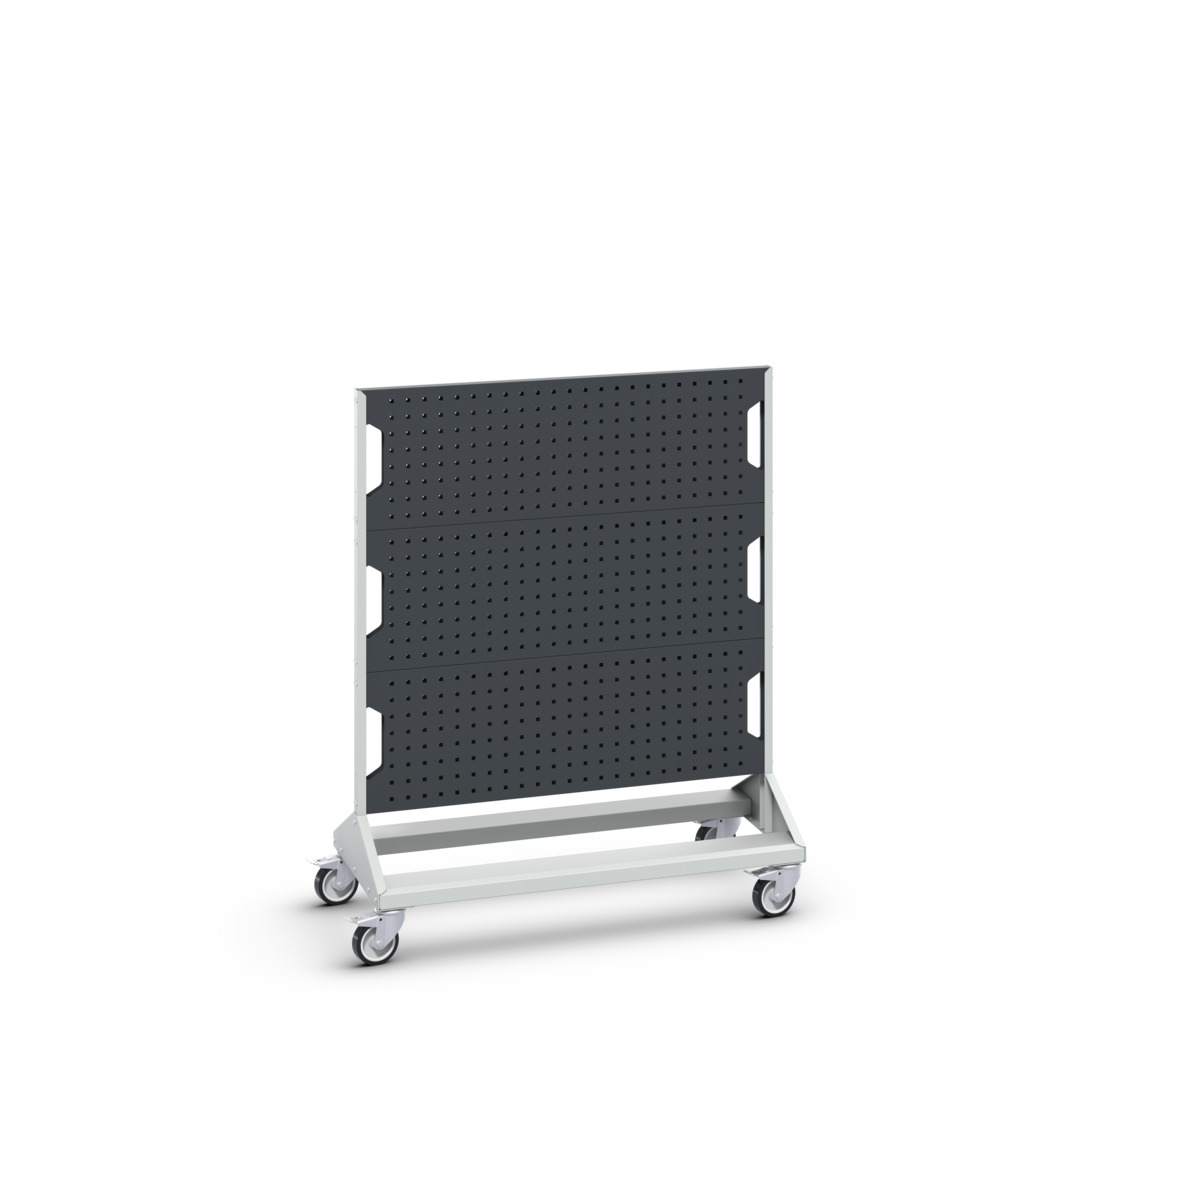 16917160. - Rack Perfo Mobile Double Face